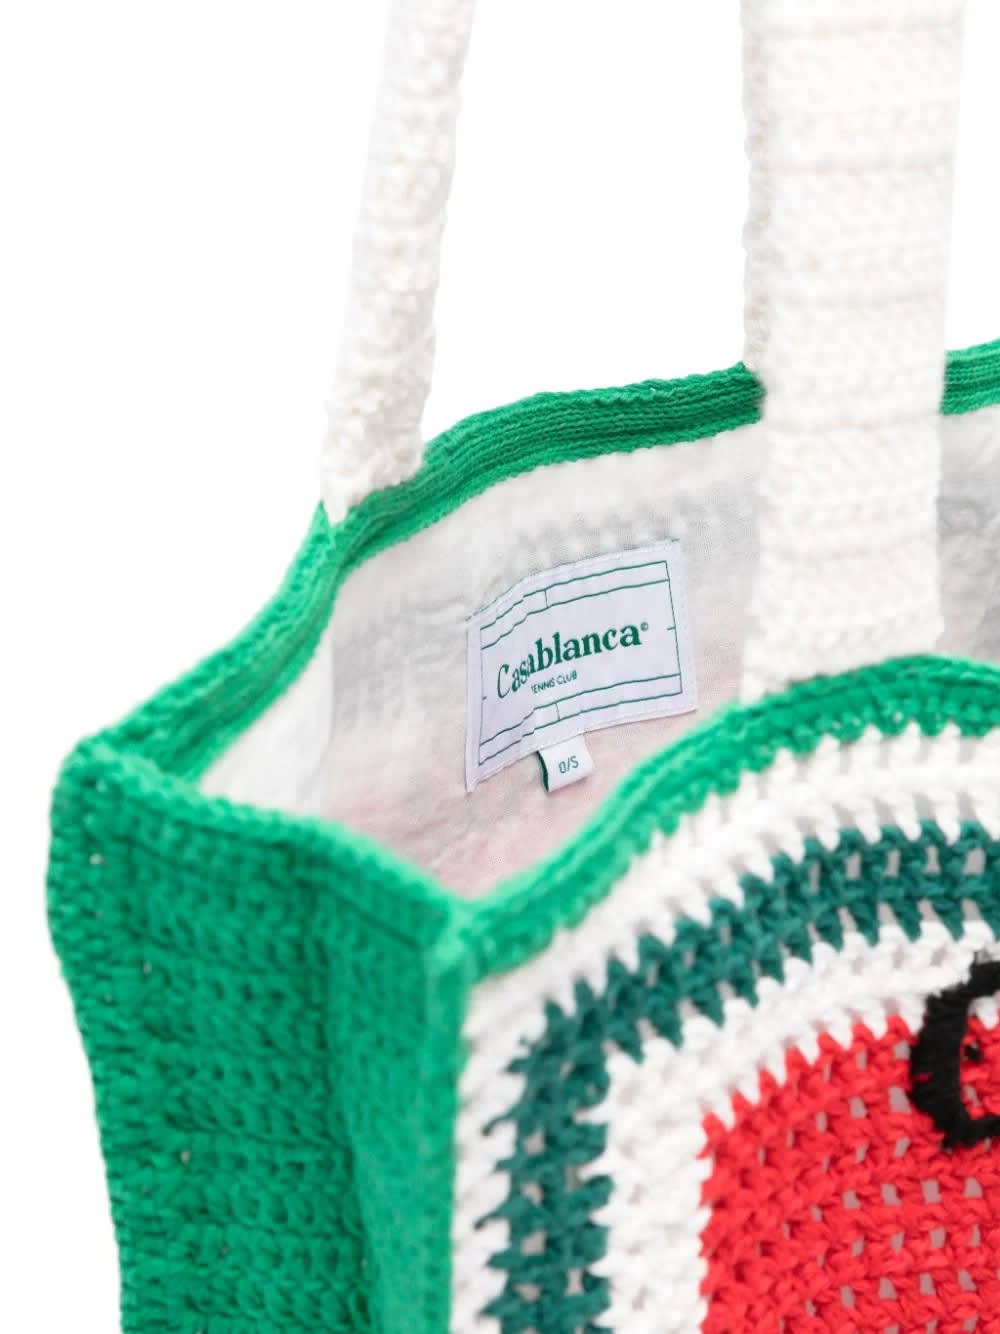 Shop Casablanca Crocheted Atlantis Tote Bag In Green, Red And White